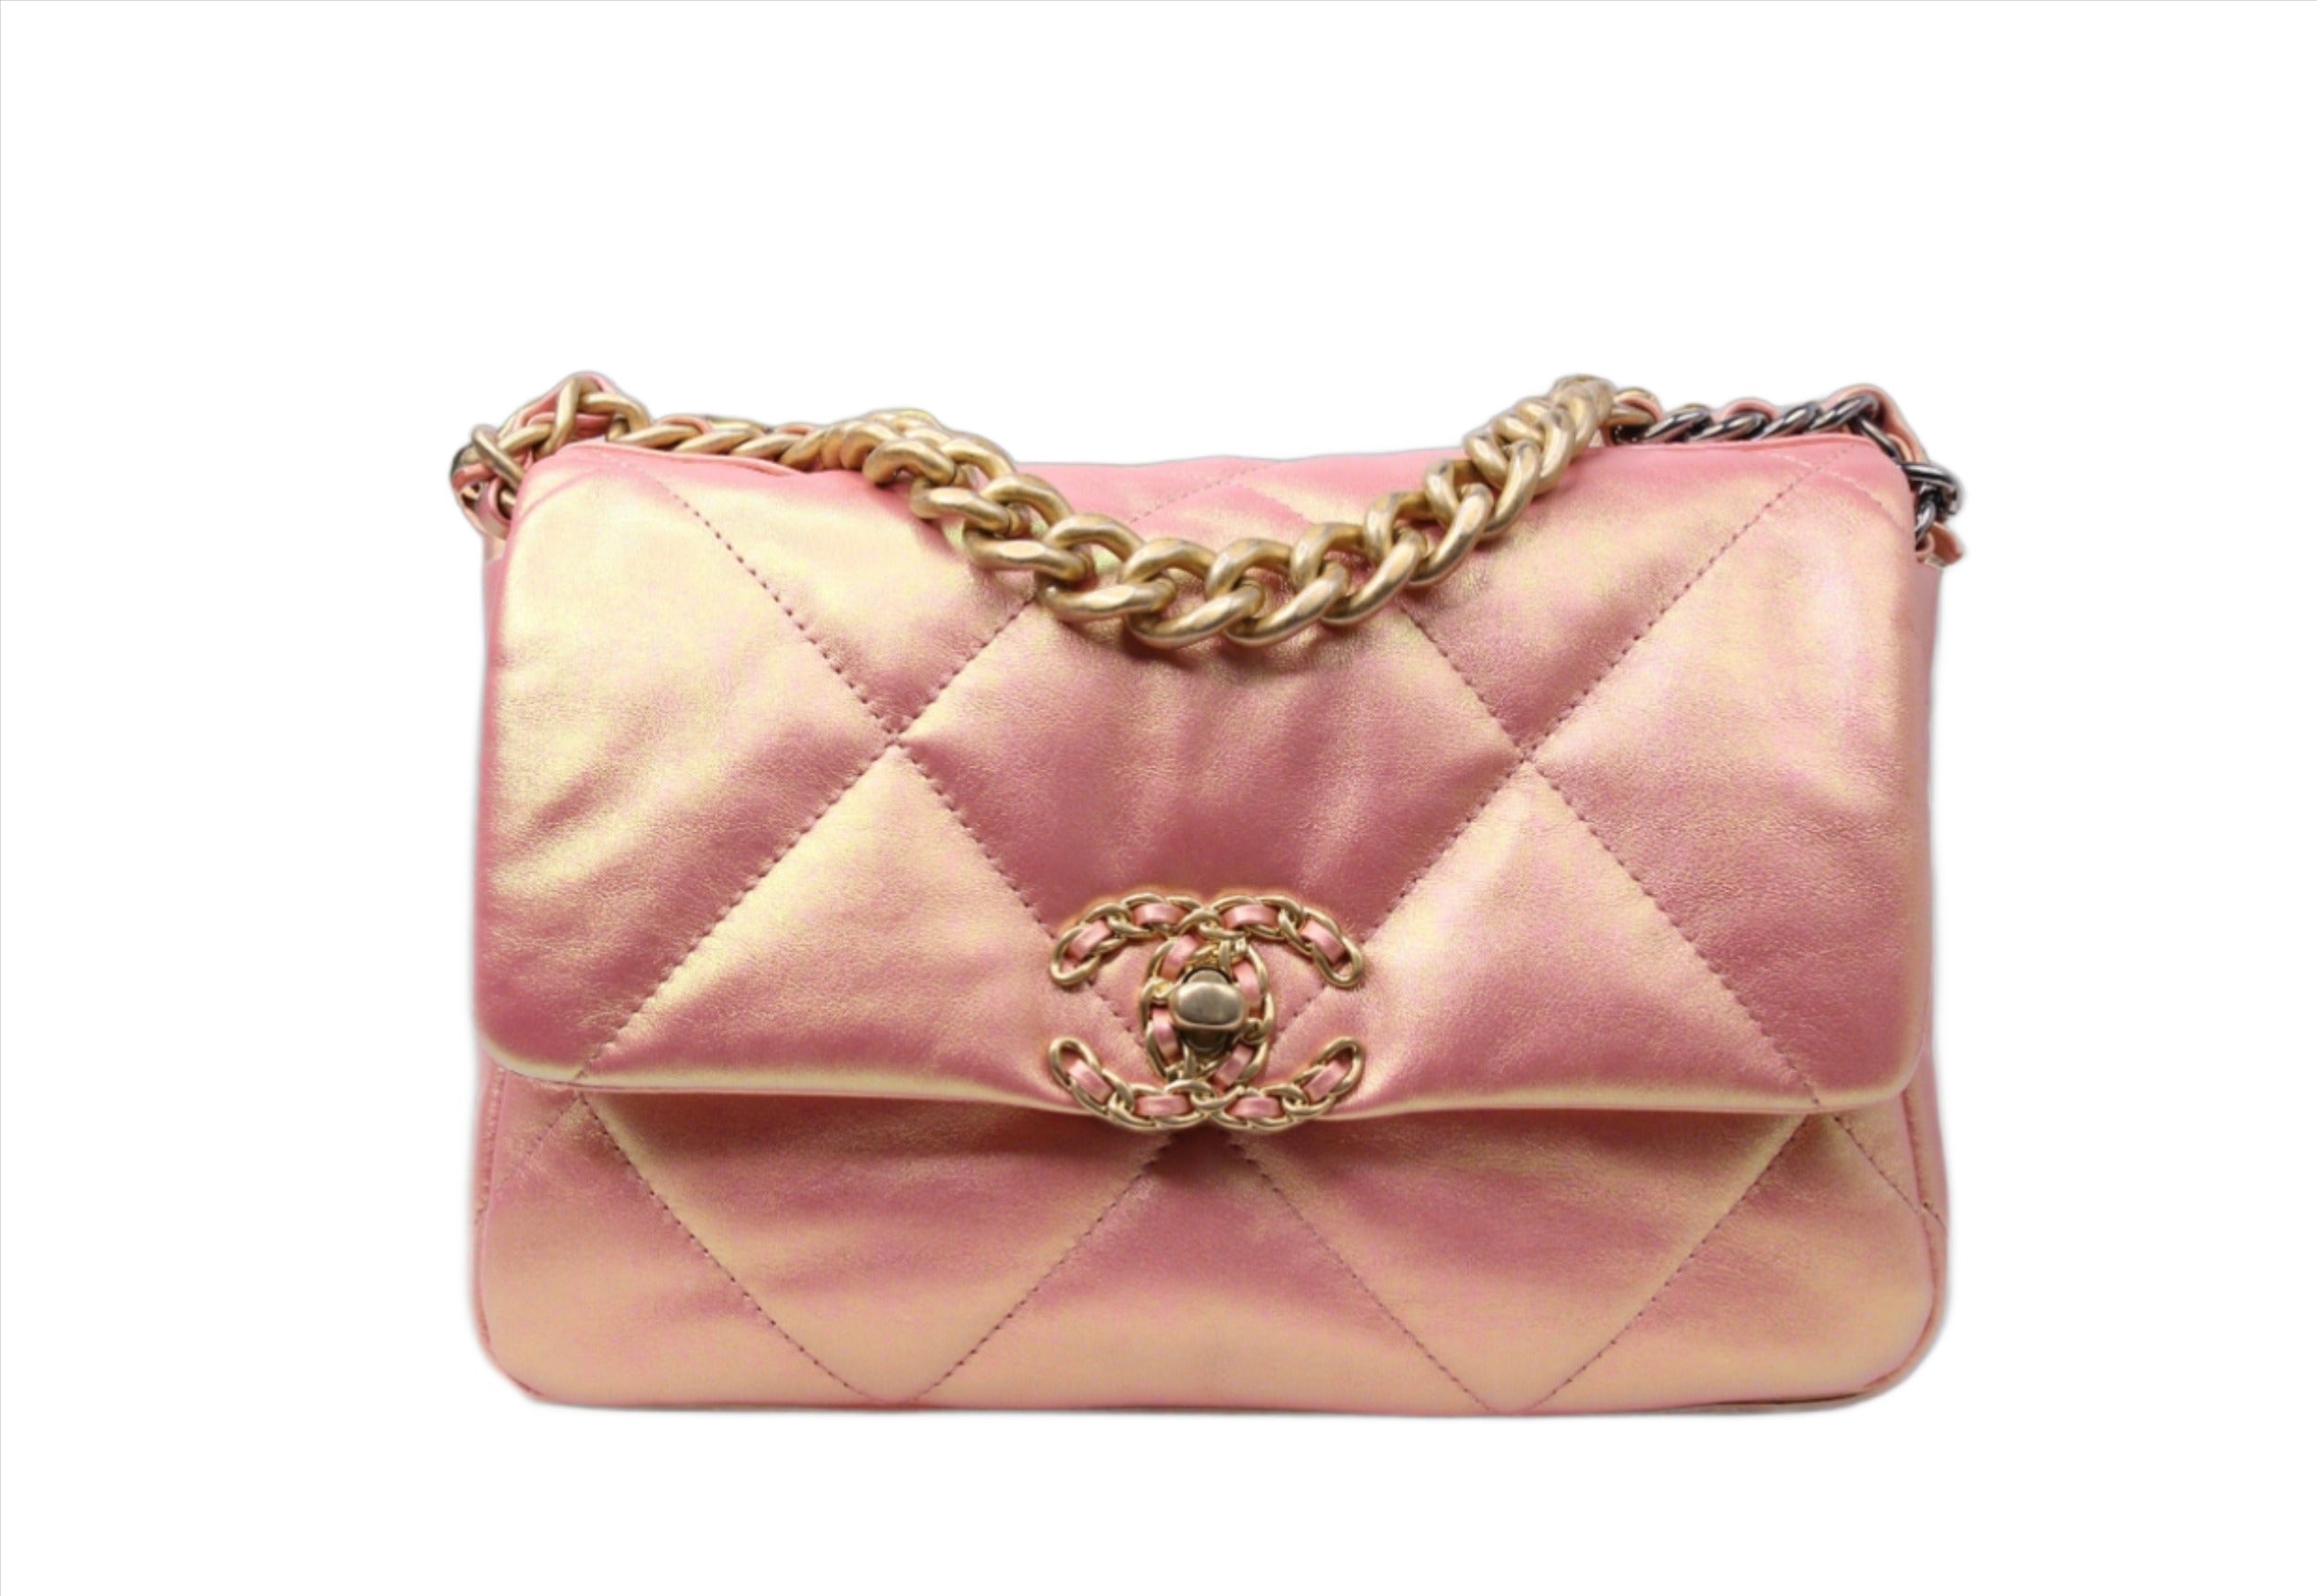 The front of a CHANEL 19 Flap Small Pink Goatskin Handbag